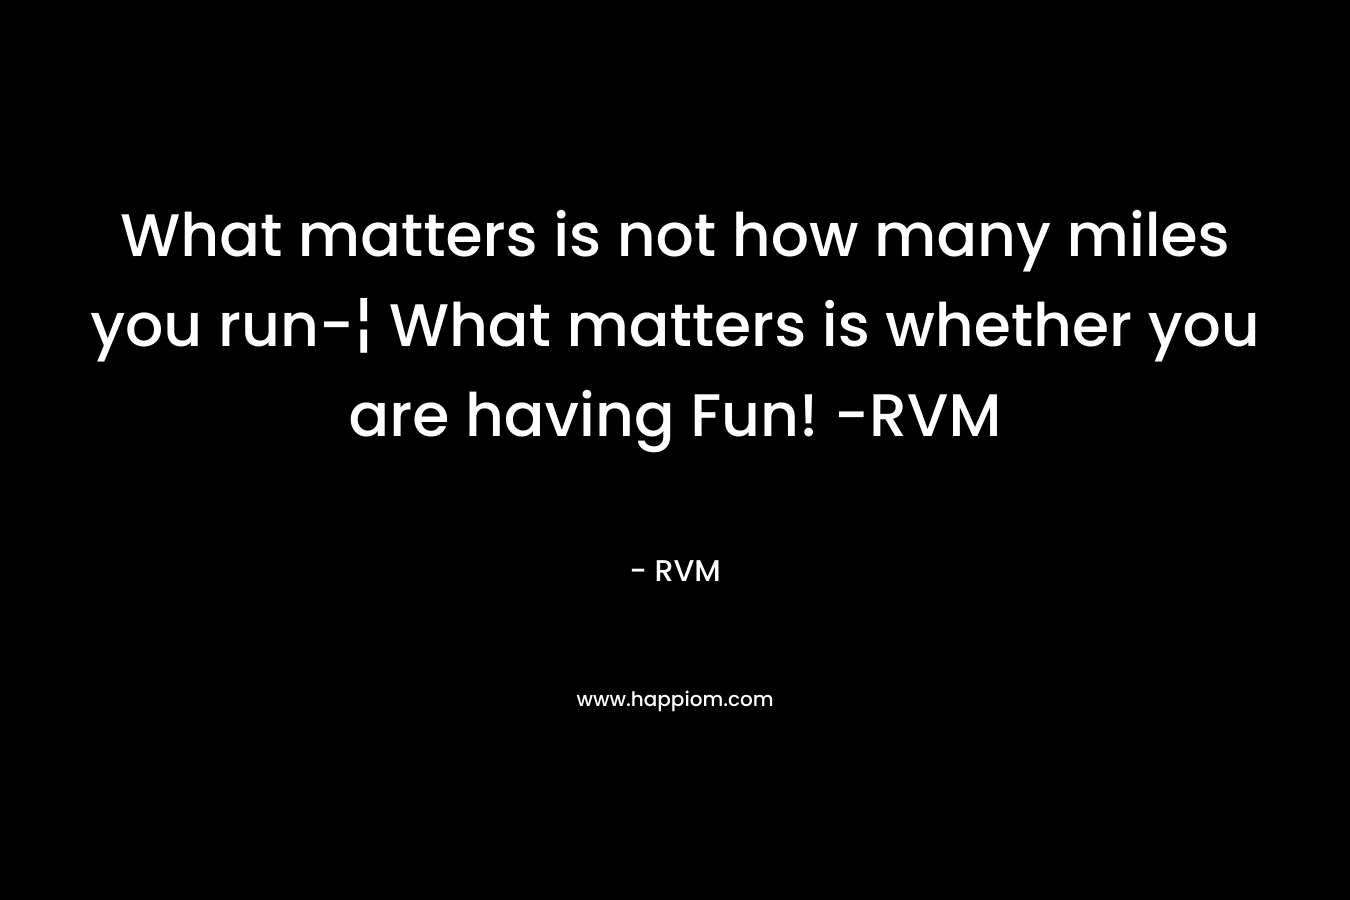 What matters is not how many miles you run-¦ What matters is whether you are having Fun! -RVM